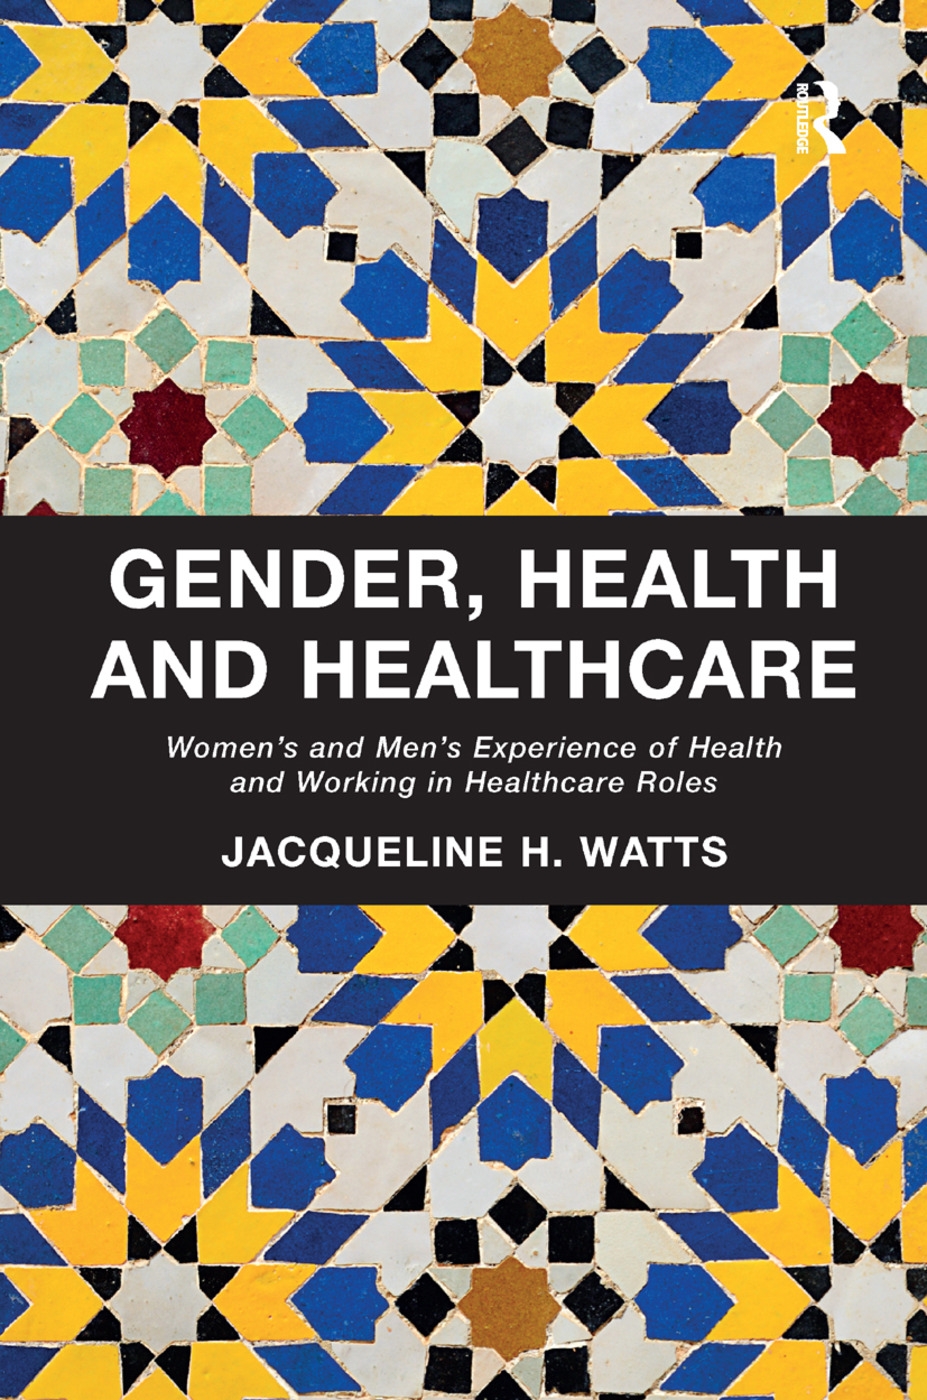 Gender, Health and Healthcare: Women’s and Men’s Experience of Health and Working in Healthcare Roles